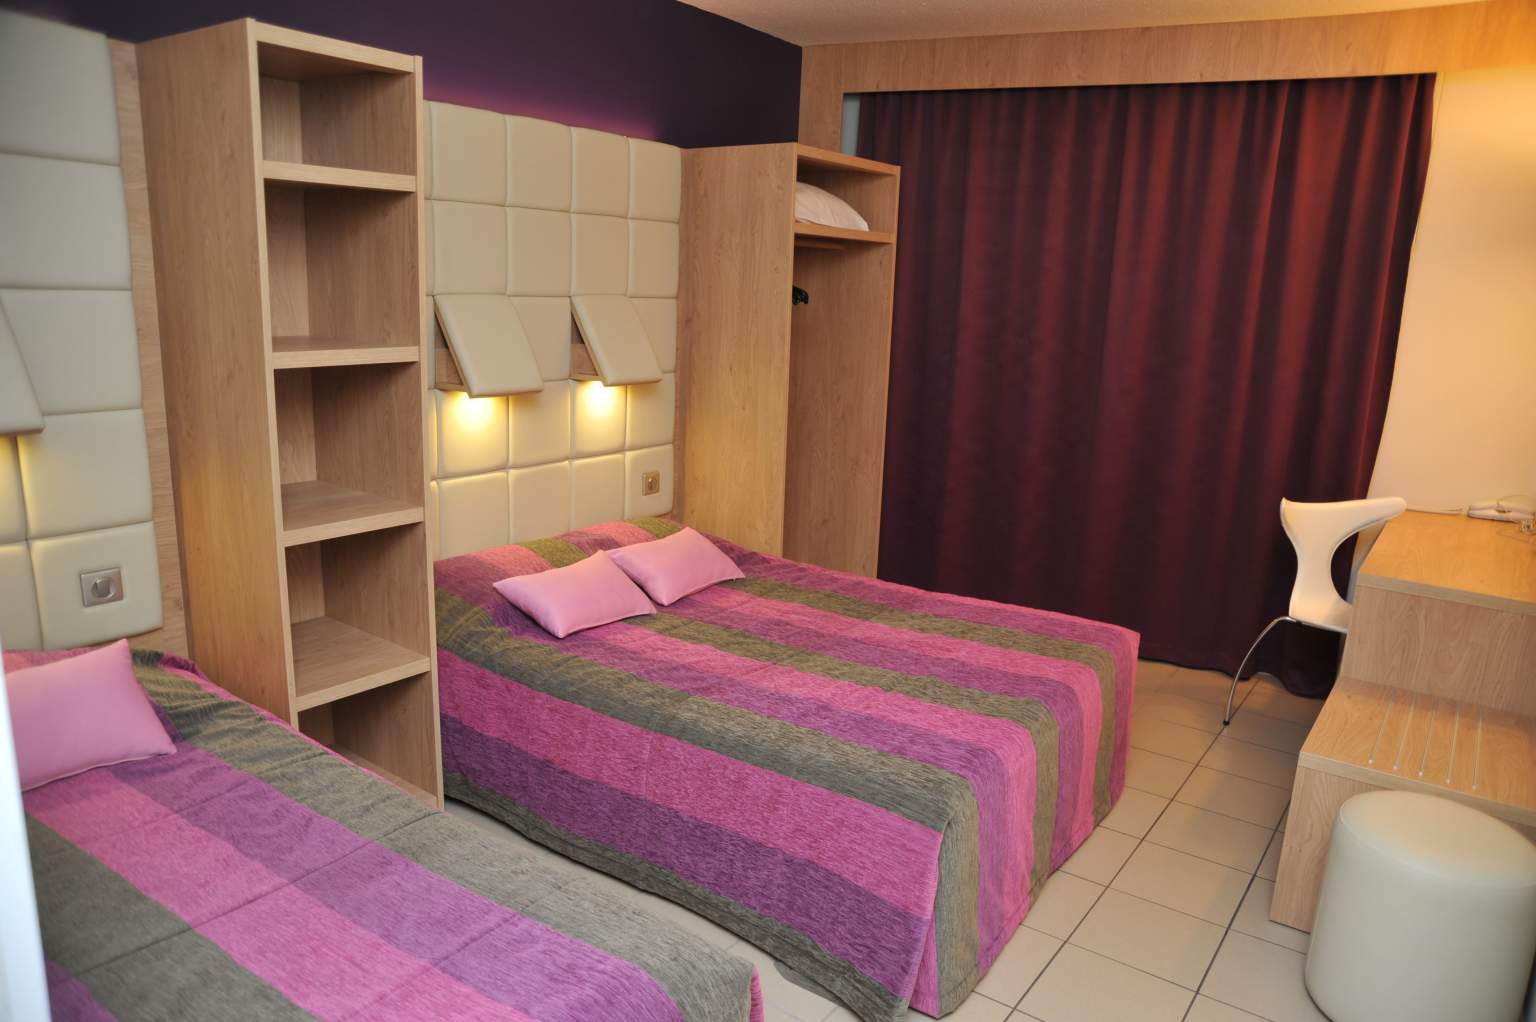 2 Star Room - Hotel Espace Cité, Carcassonne, Hotel with view on the Medieval City